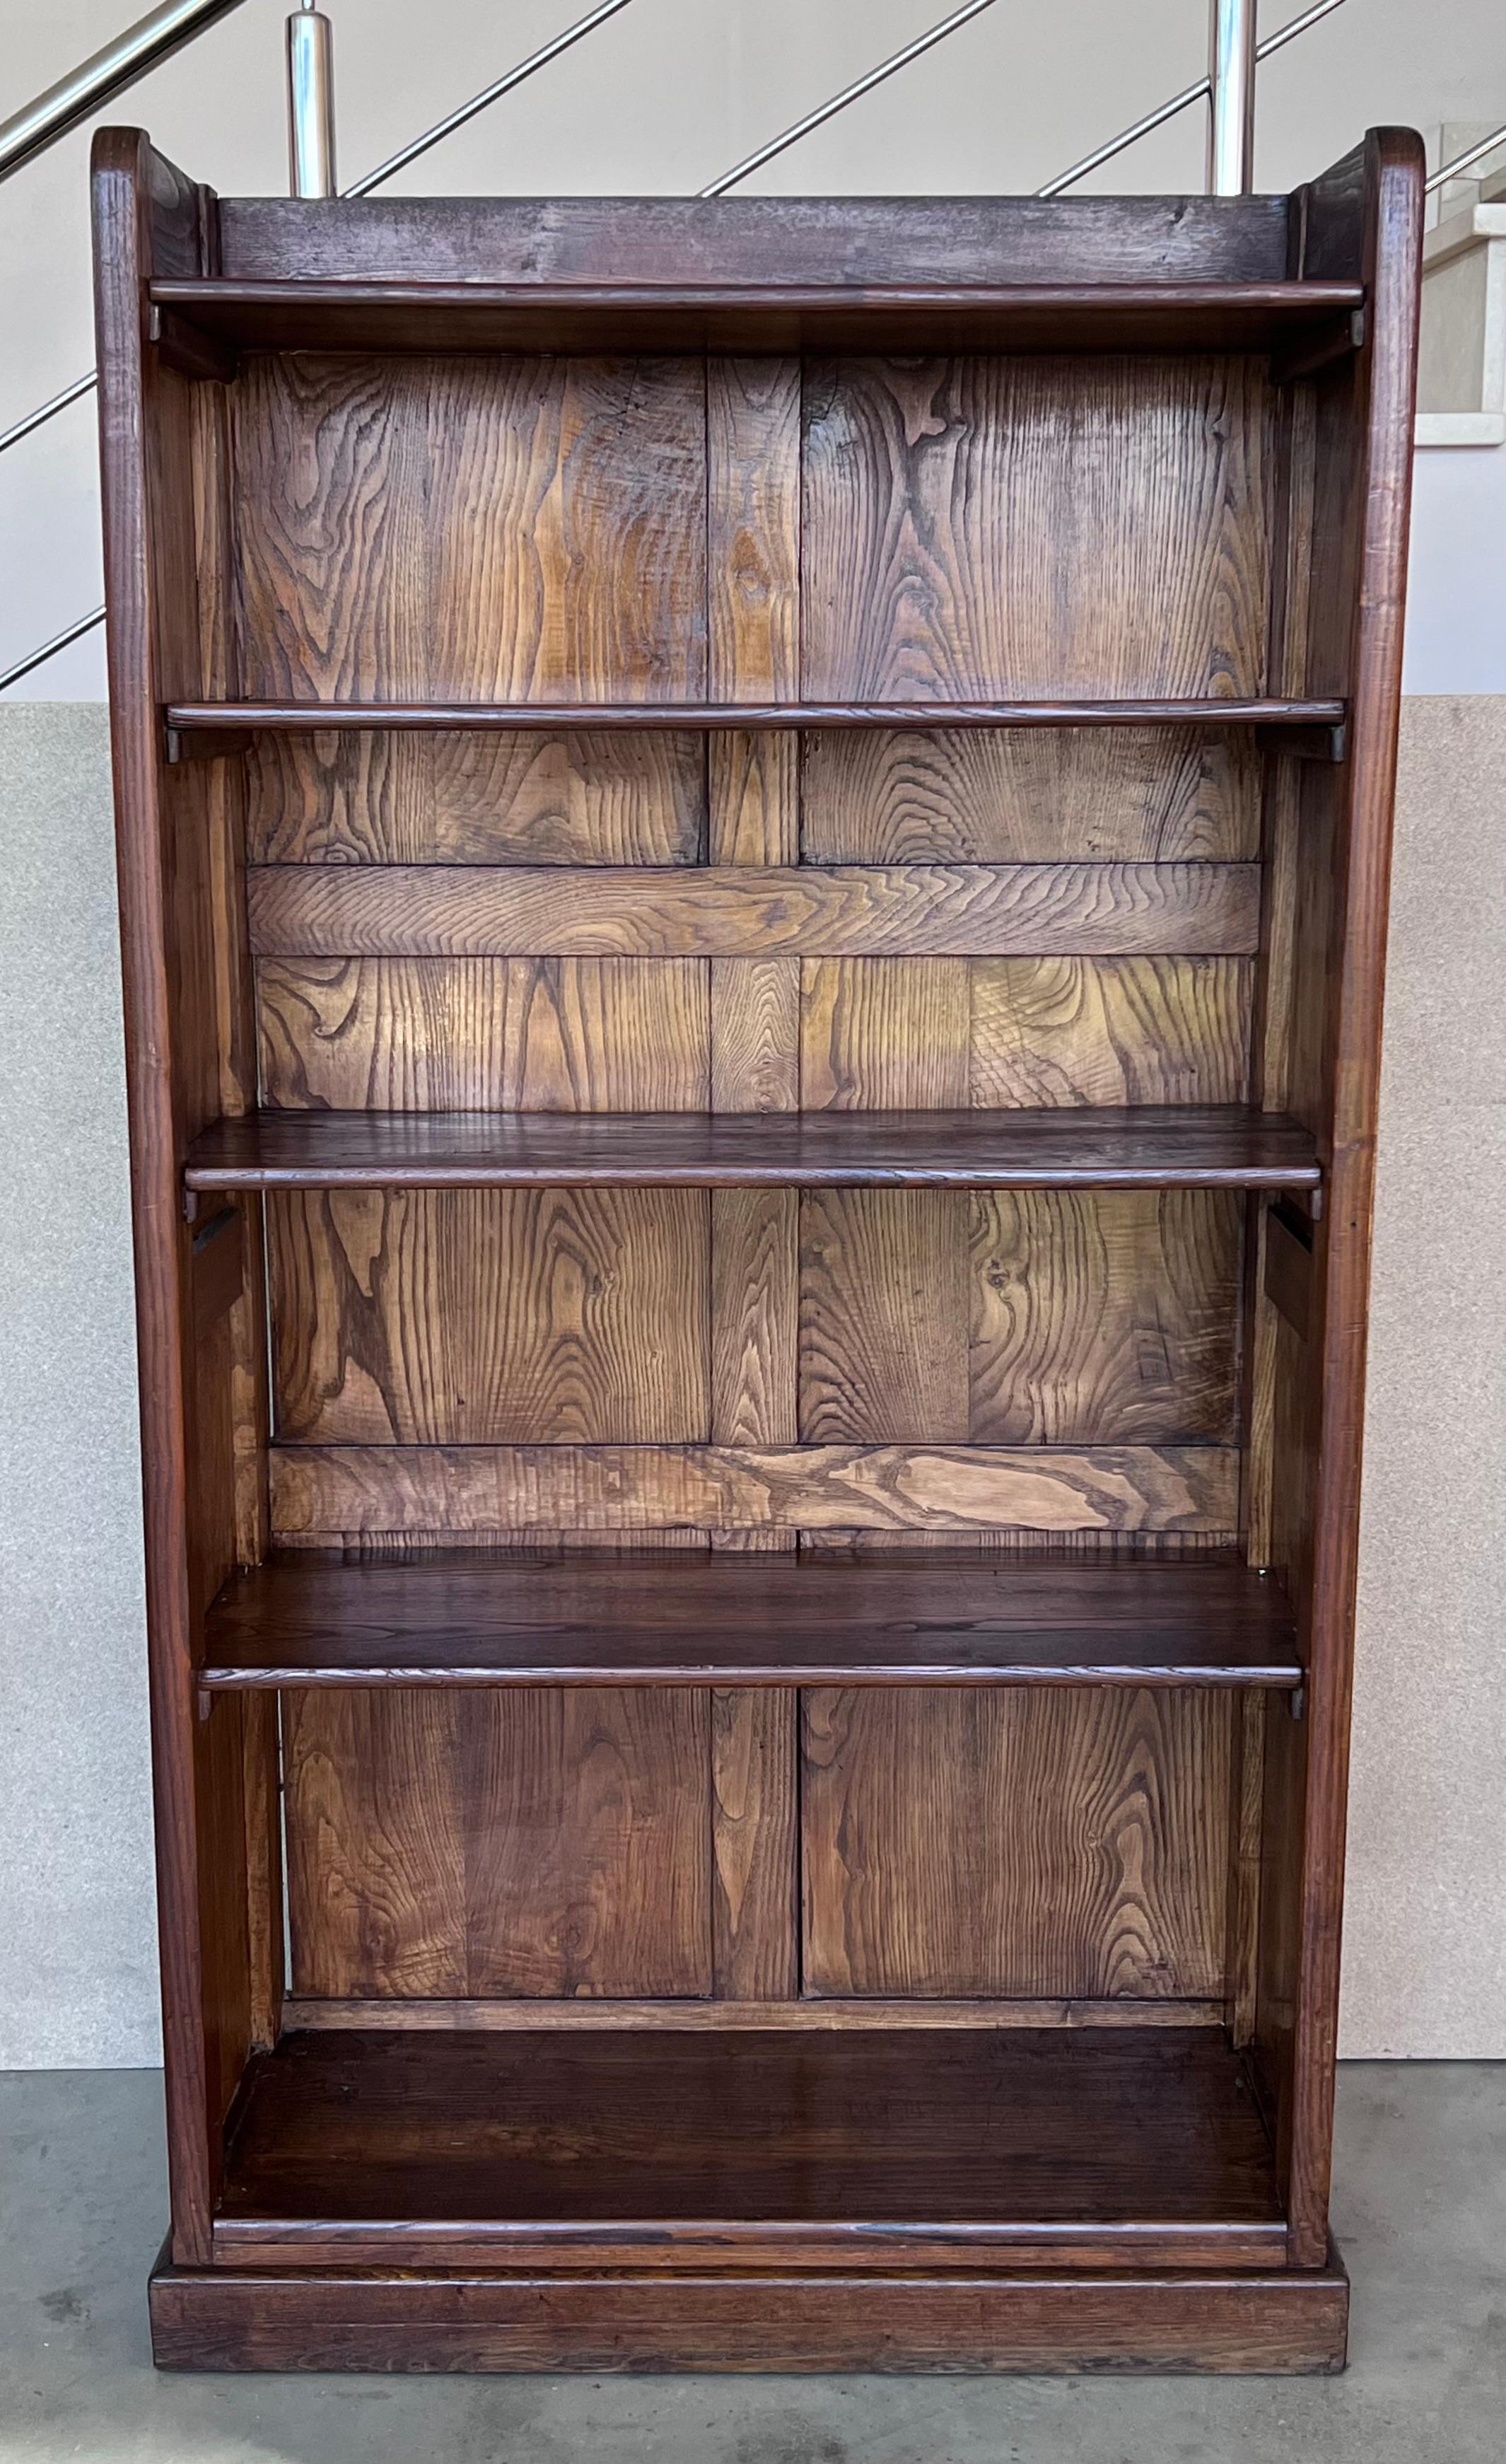 Spanish 19th Solid Oak Bookcase or Etagere with Five Shelves